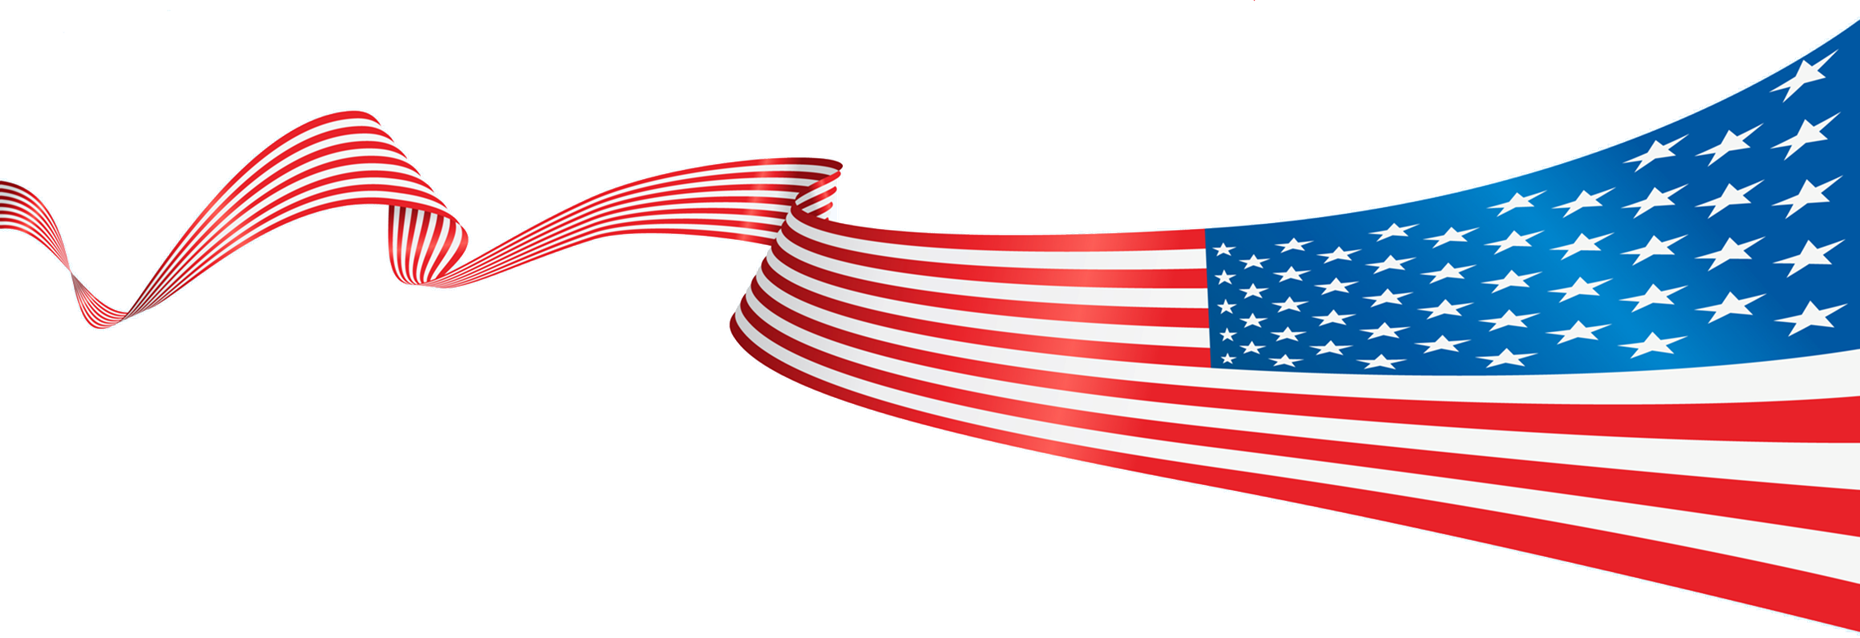 Download Clipart banner american flag, Clipart banner american flag ...